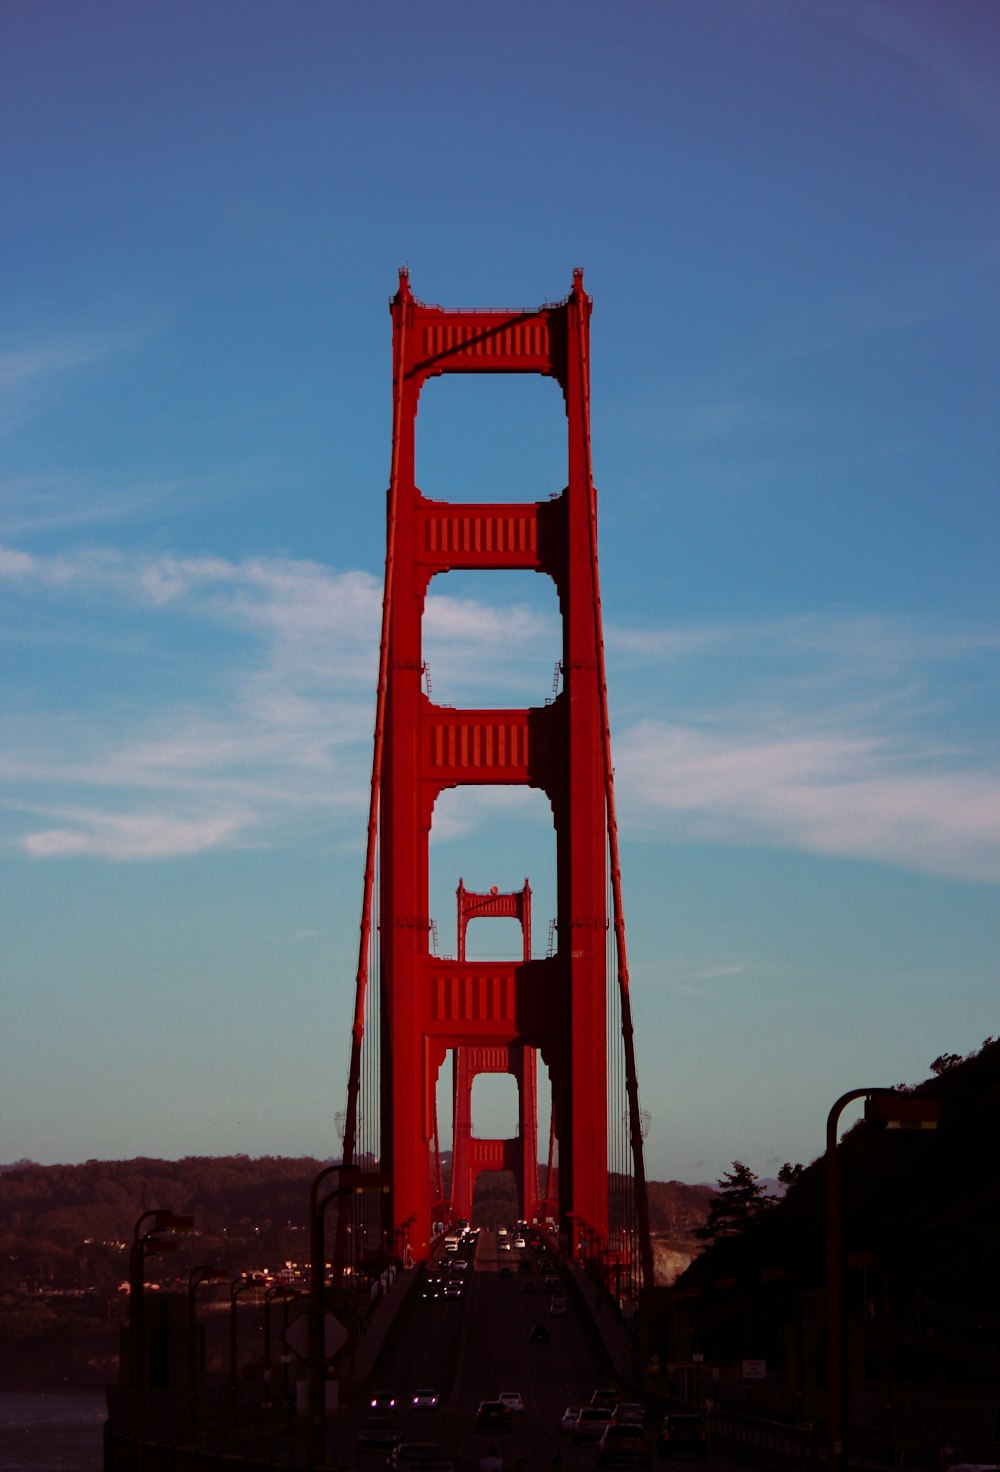 a large red bridge with Golden Gate Bridge in the background